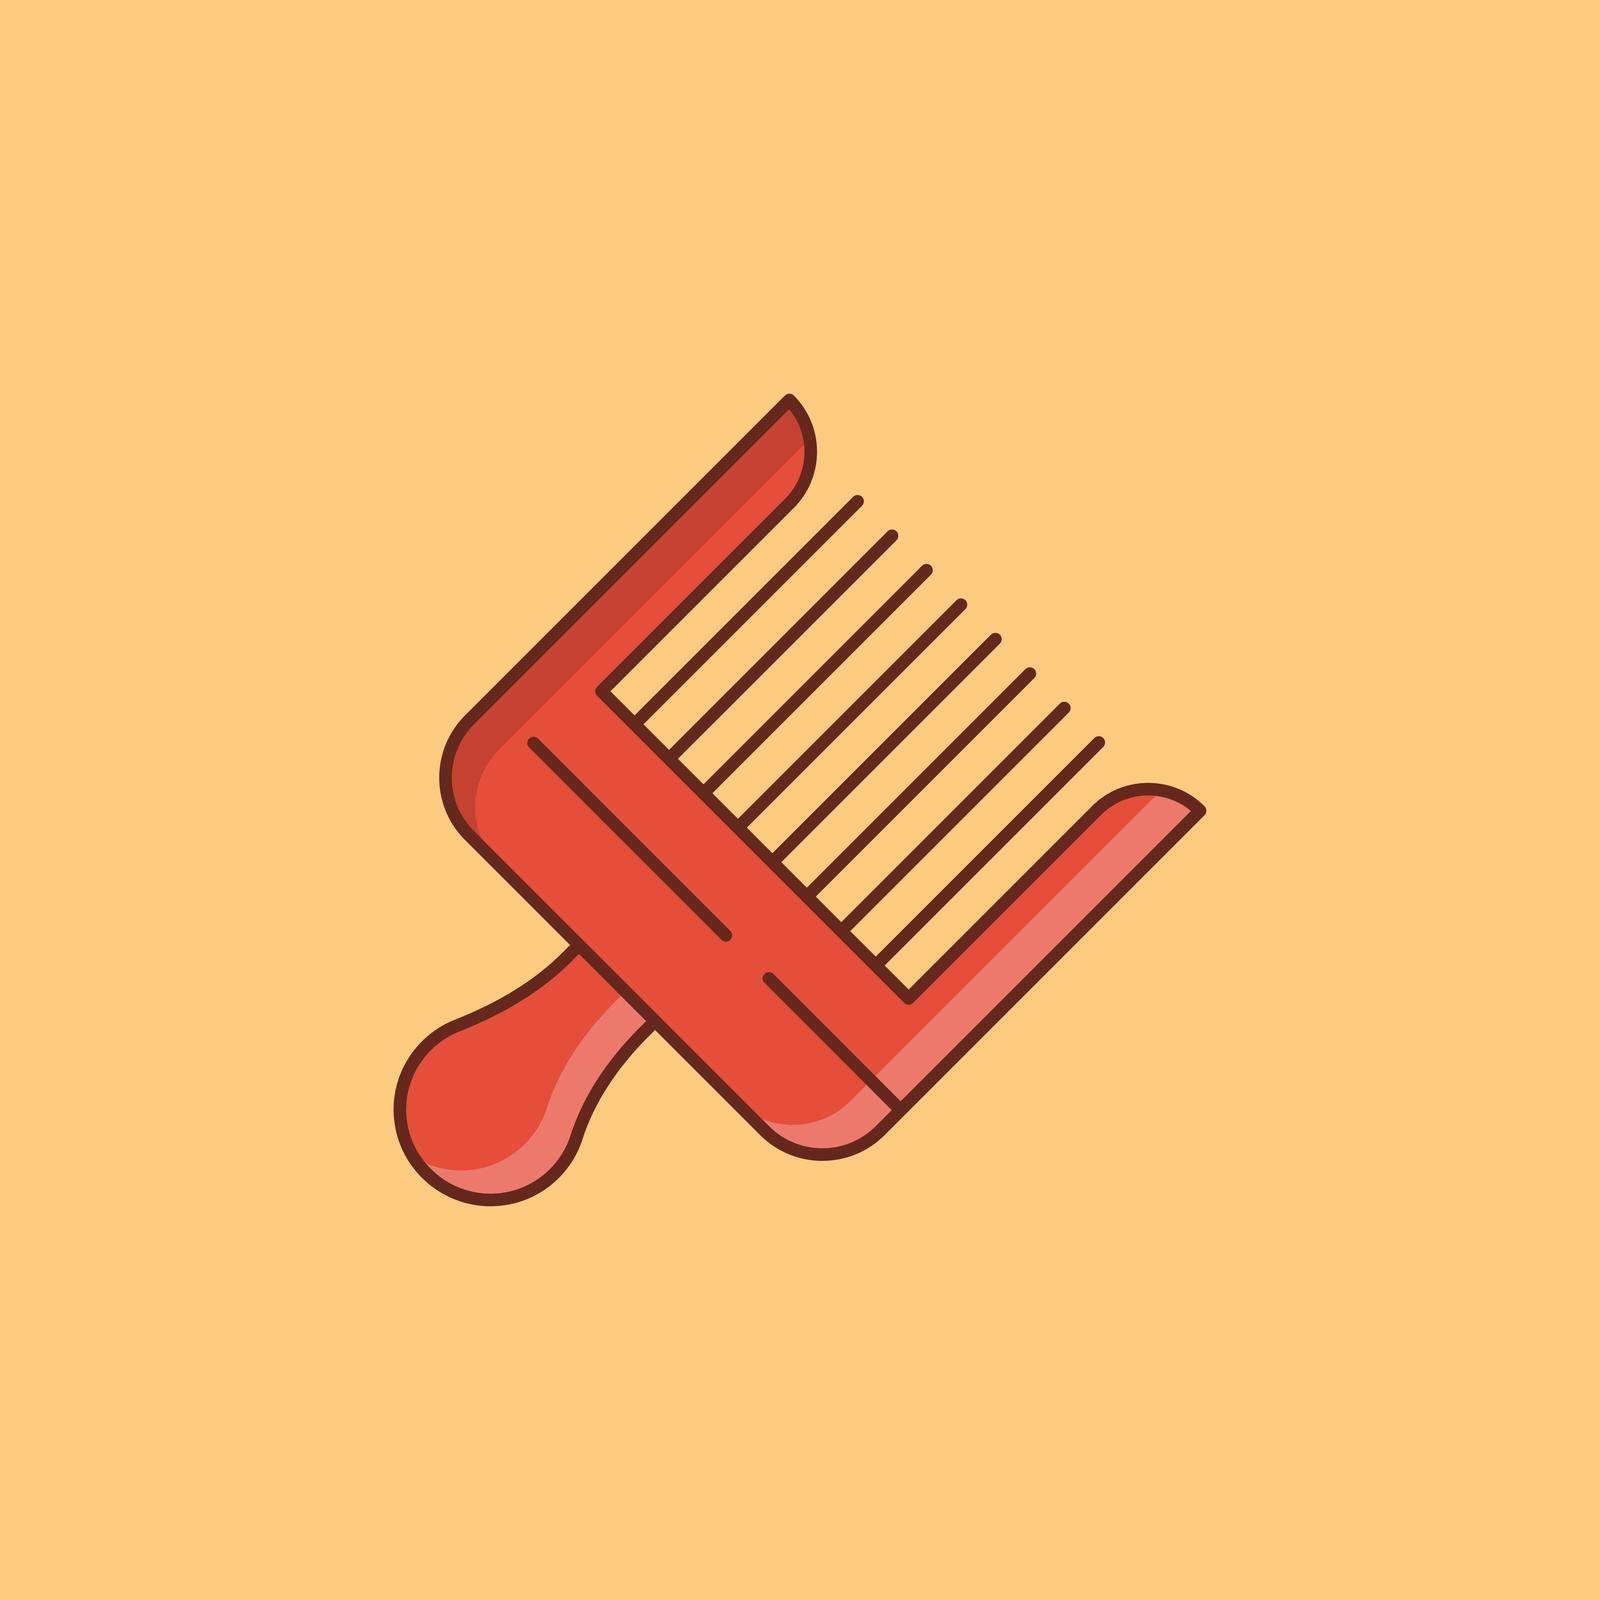 comb by FlaticonsDesign